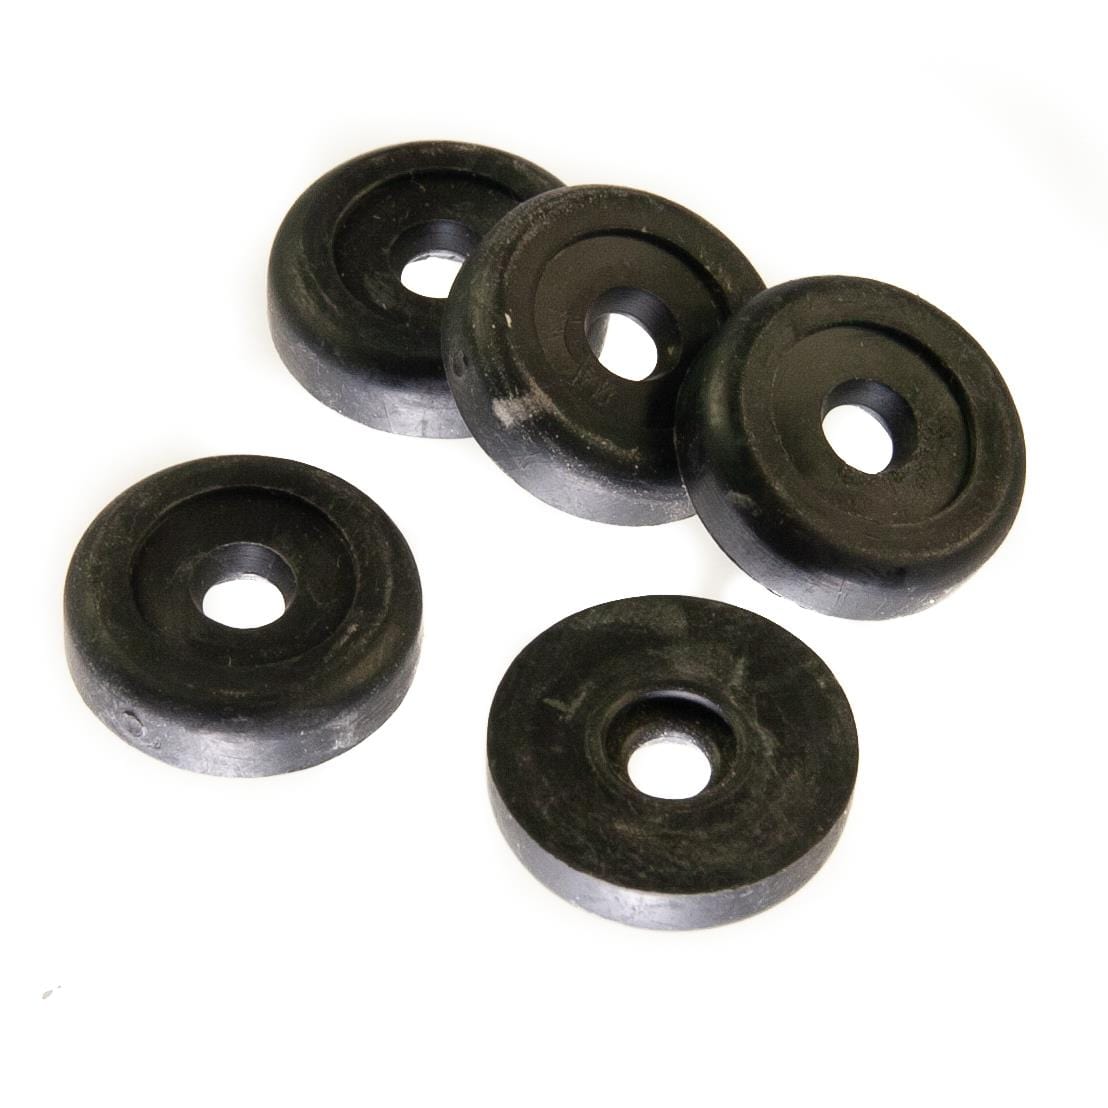 Delta Tap Washer 3/4" BSP Replacement Tap Washer (Pack of 4) Tap Washers Thunderfix 100095